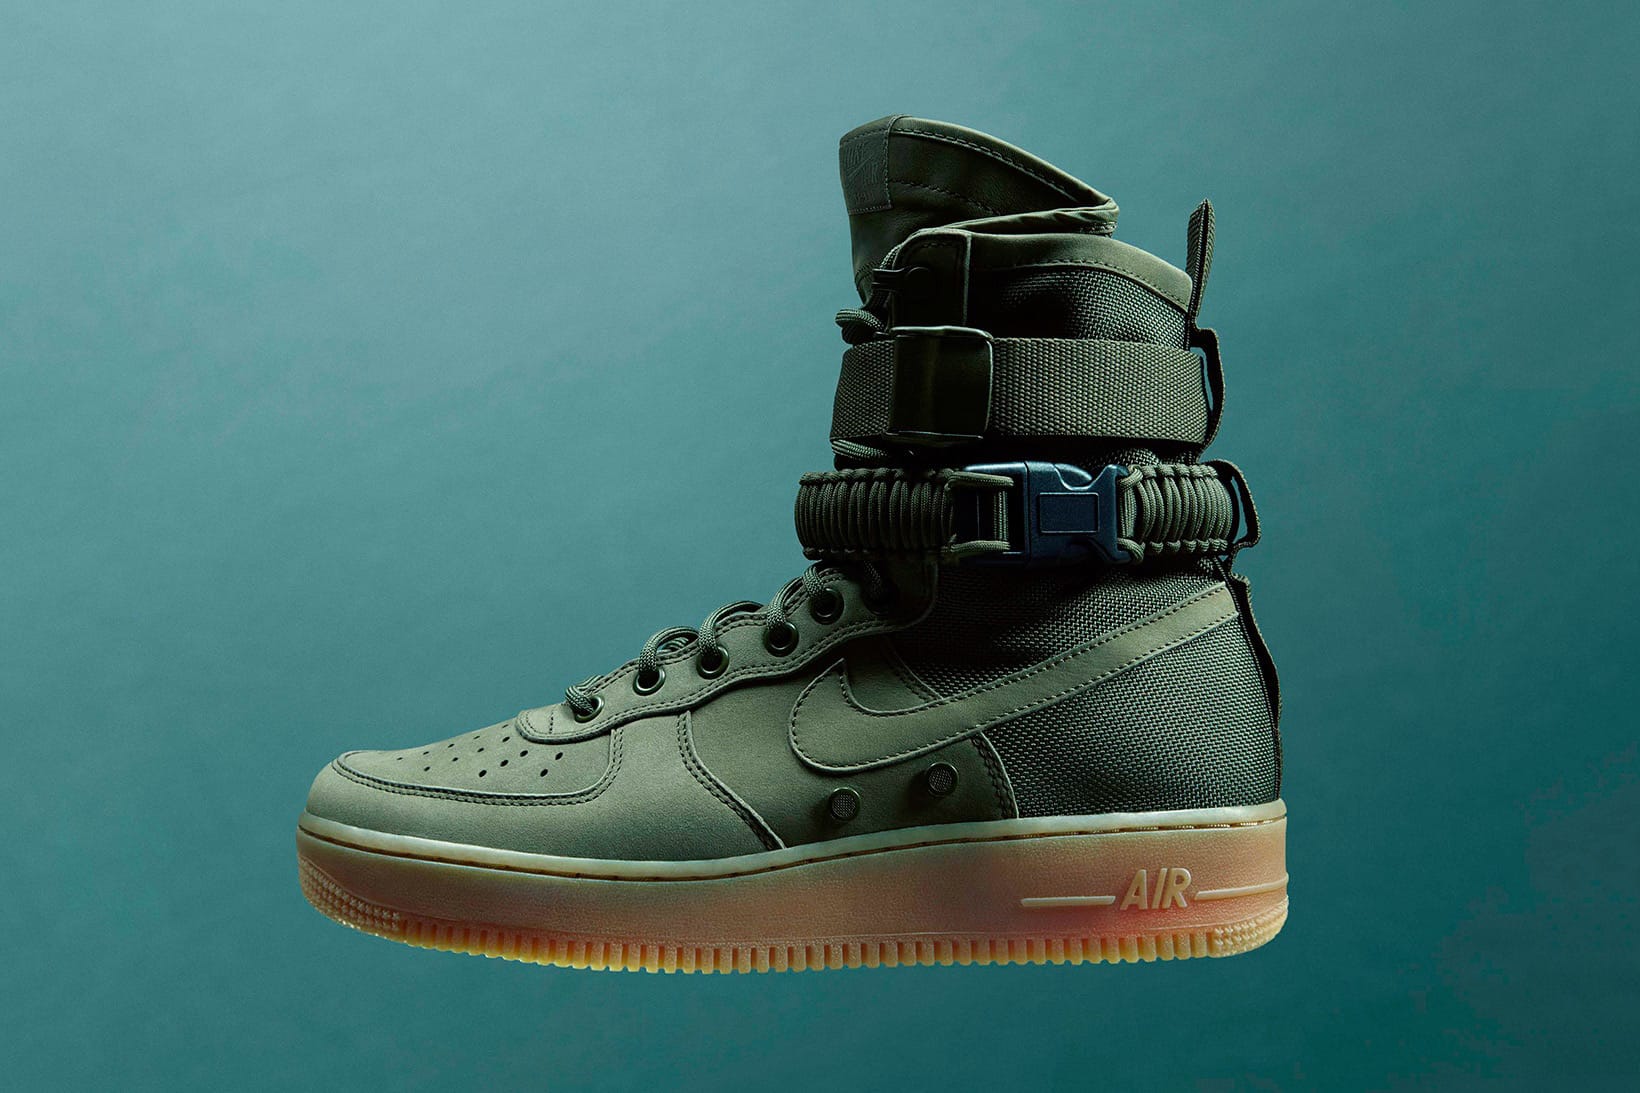 A First Look at the Nike SF-AF1 Mid 